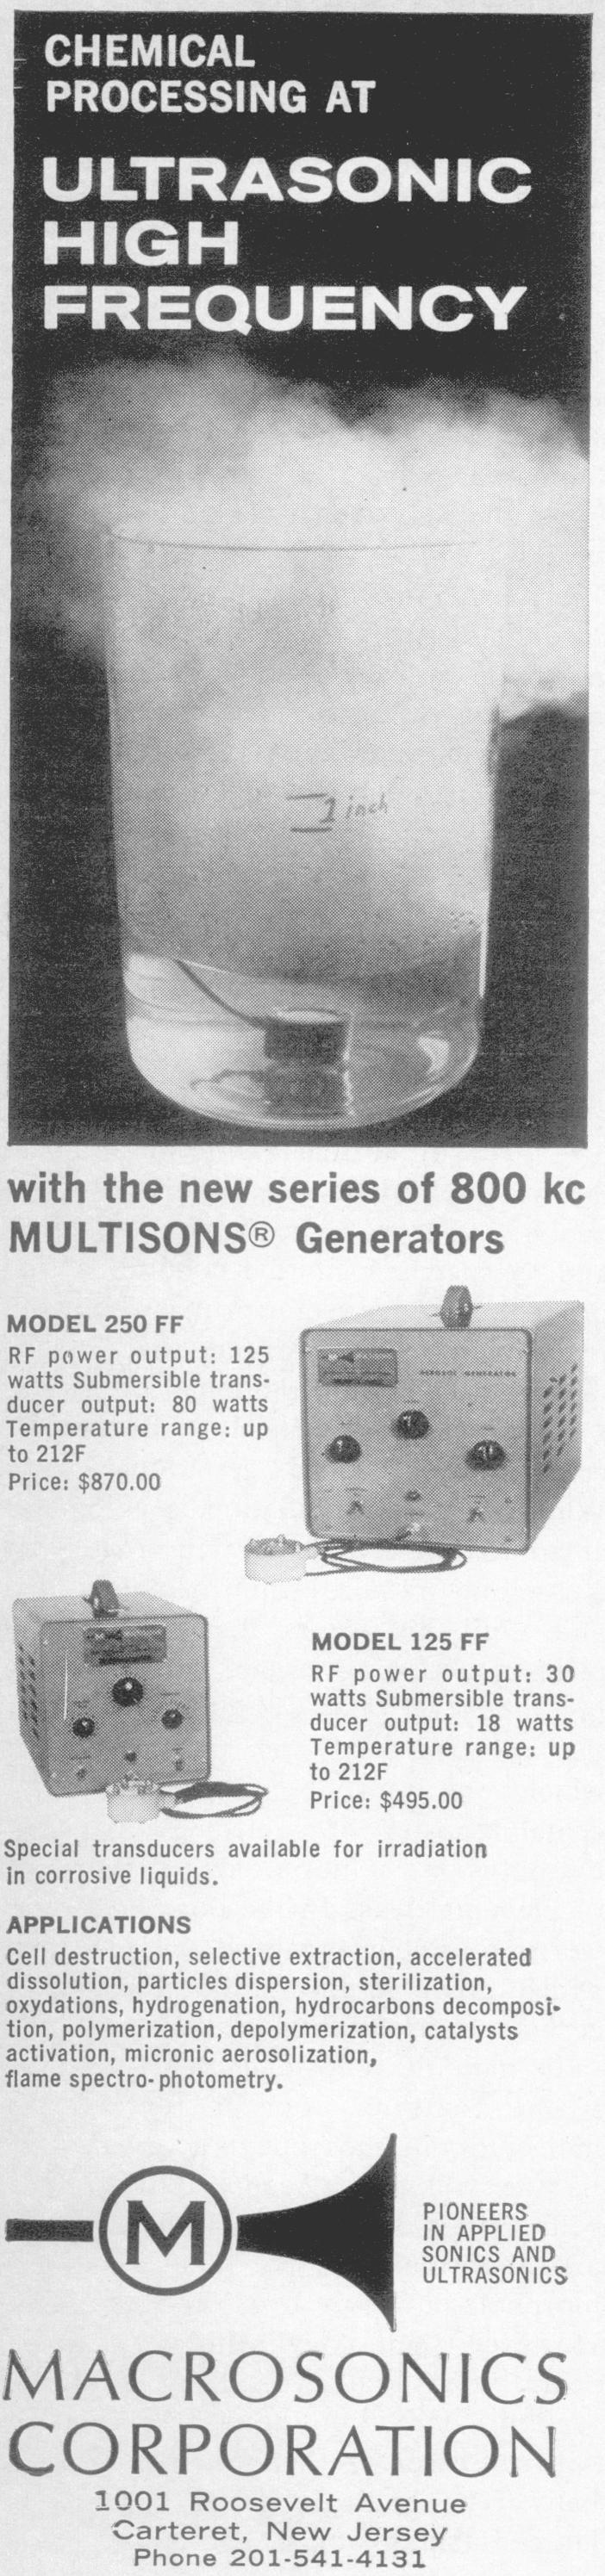 with the new series of 800 kc MULTISONSRO Generators MODEL 250 FF RF po(wer output: 125 watts Submersible trans- "_ ', ducer output: 80 watts 5- - Temperature range: up to 212F Price: $870.